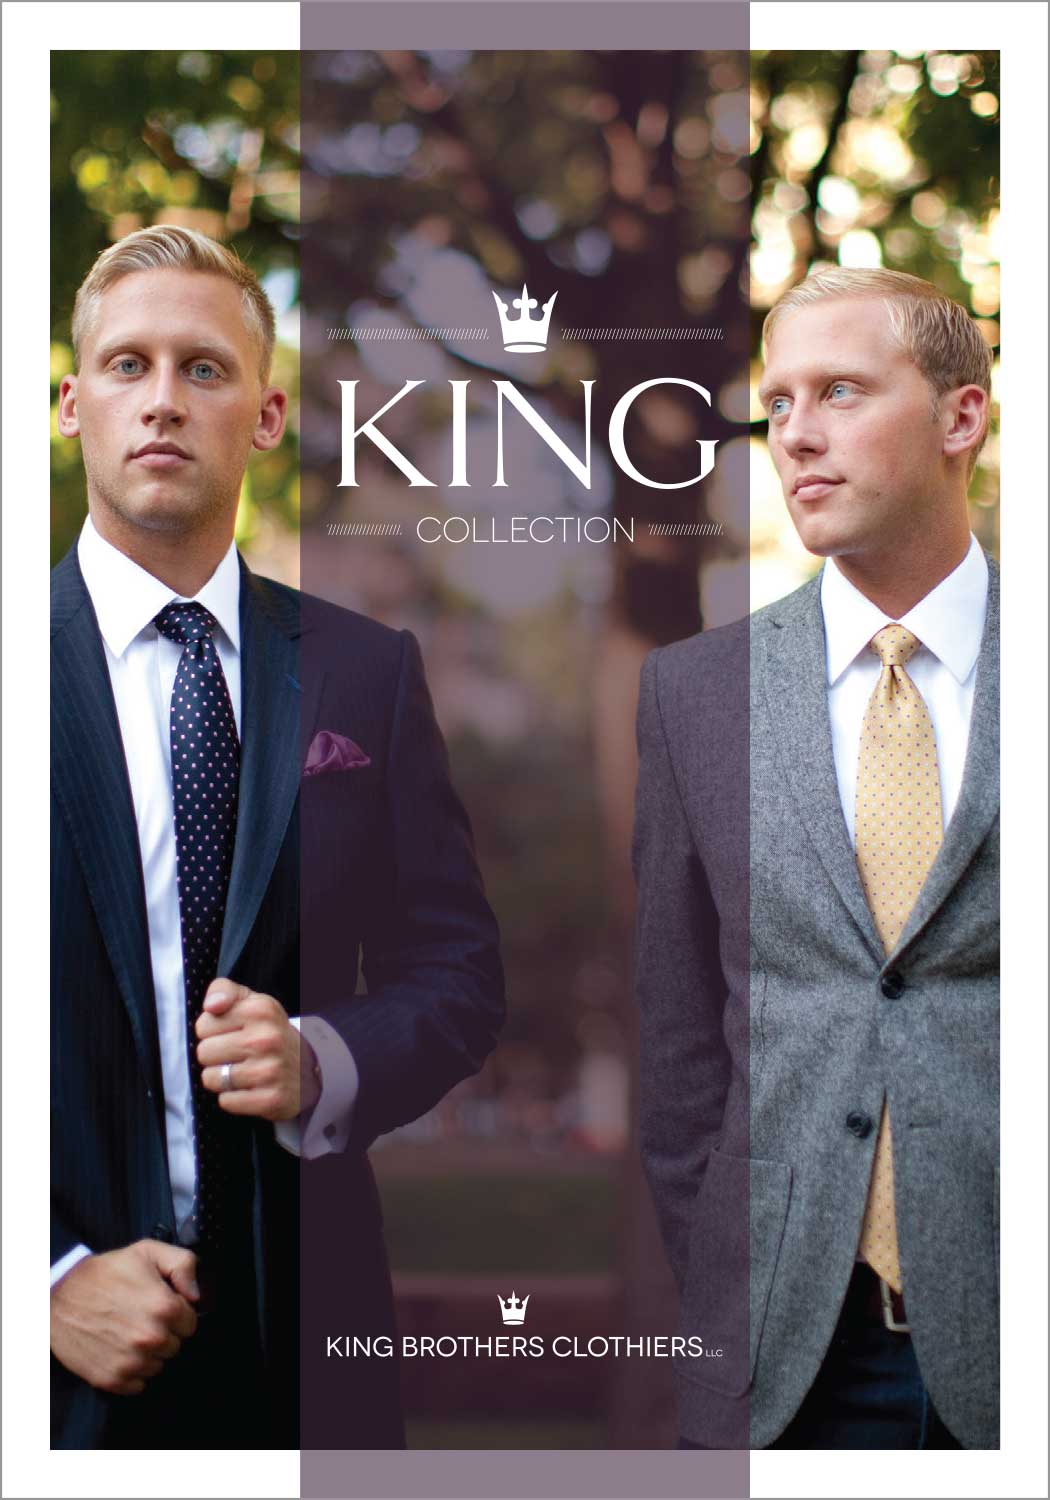 King-collection